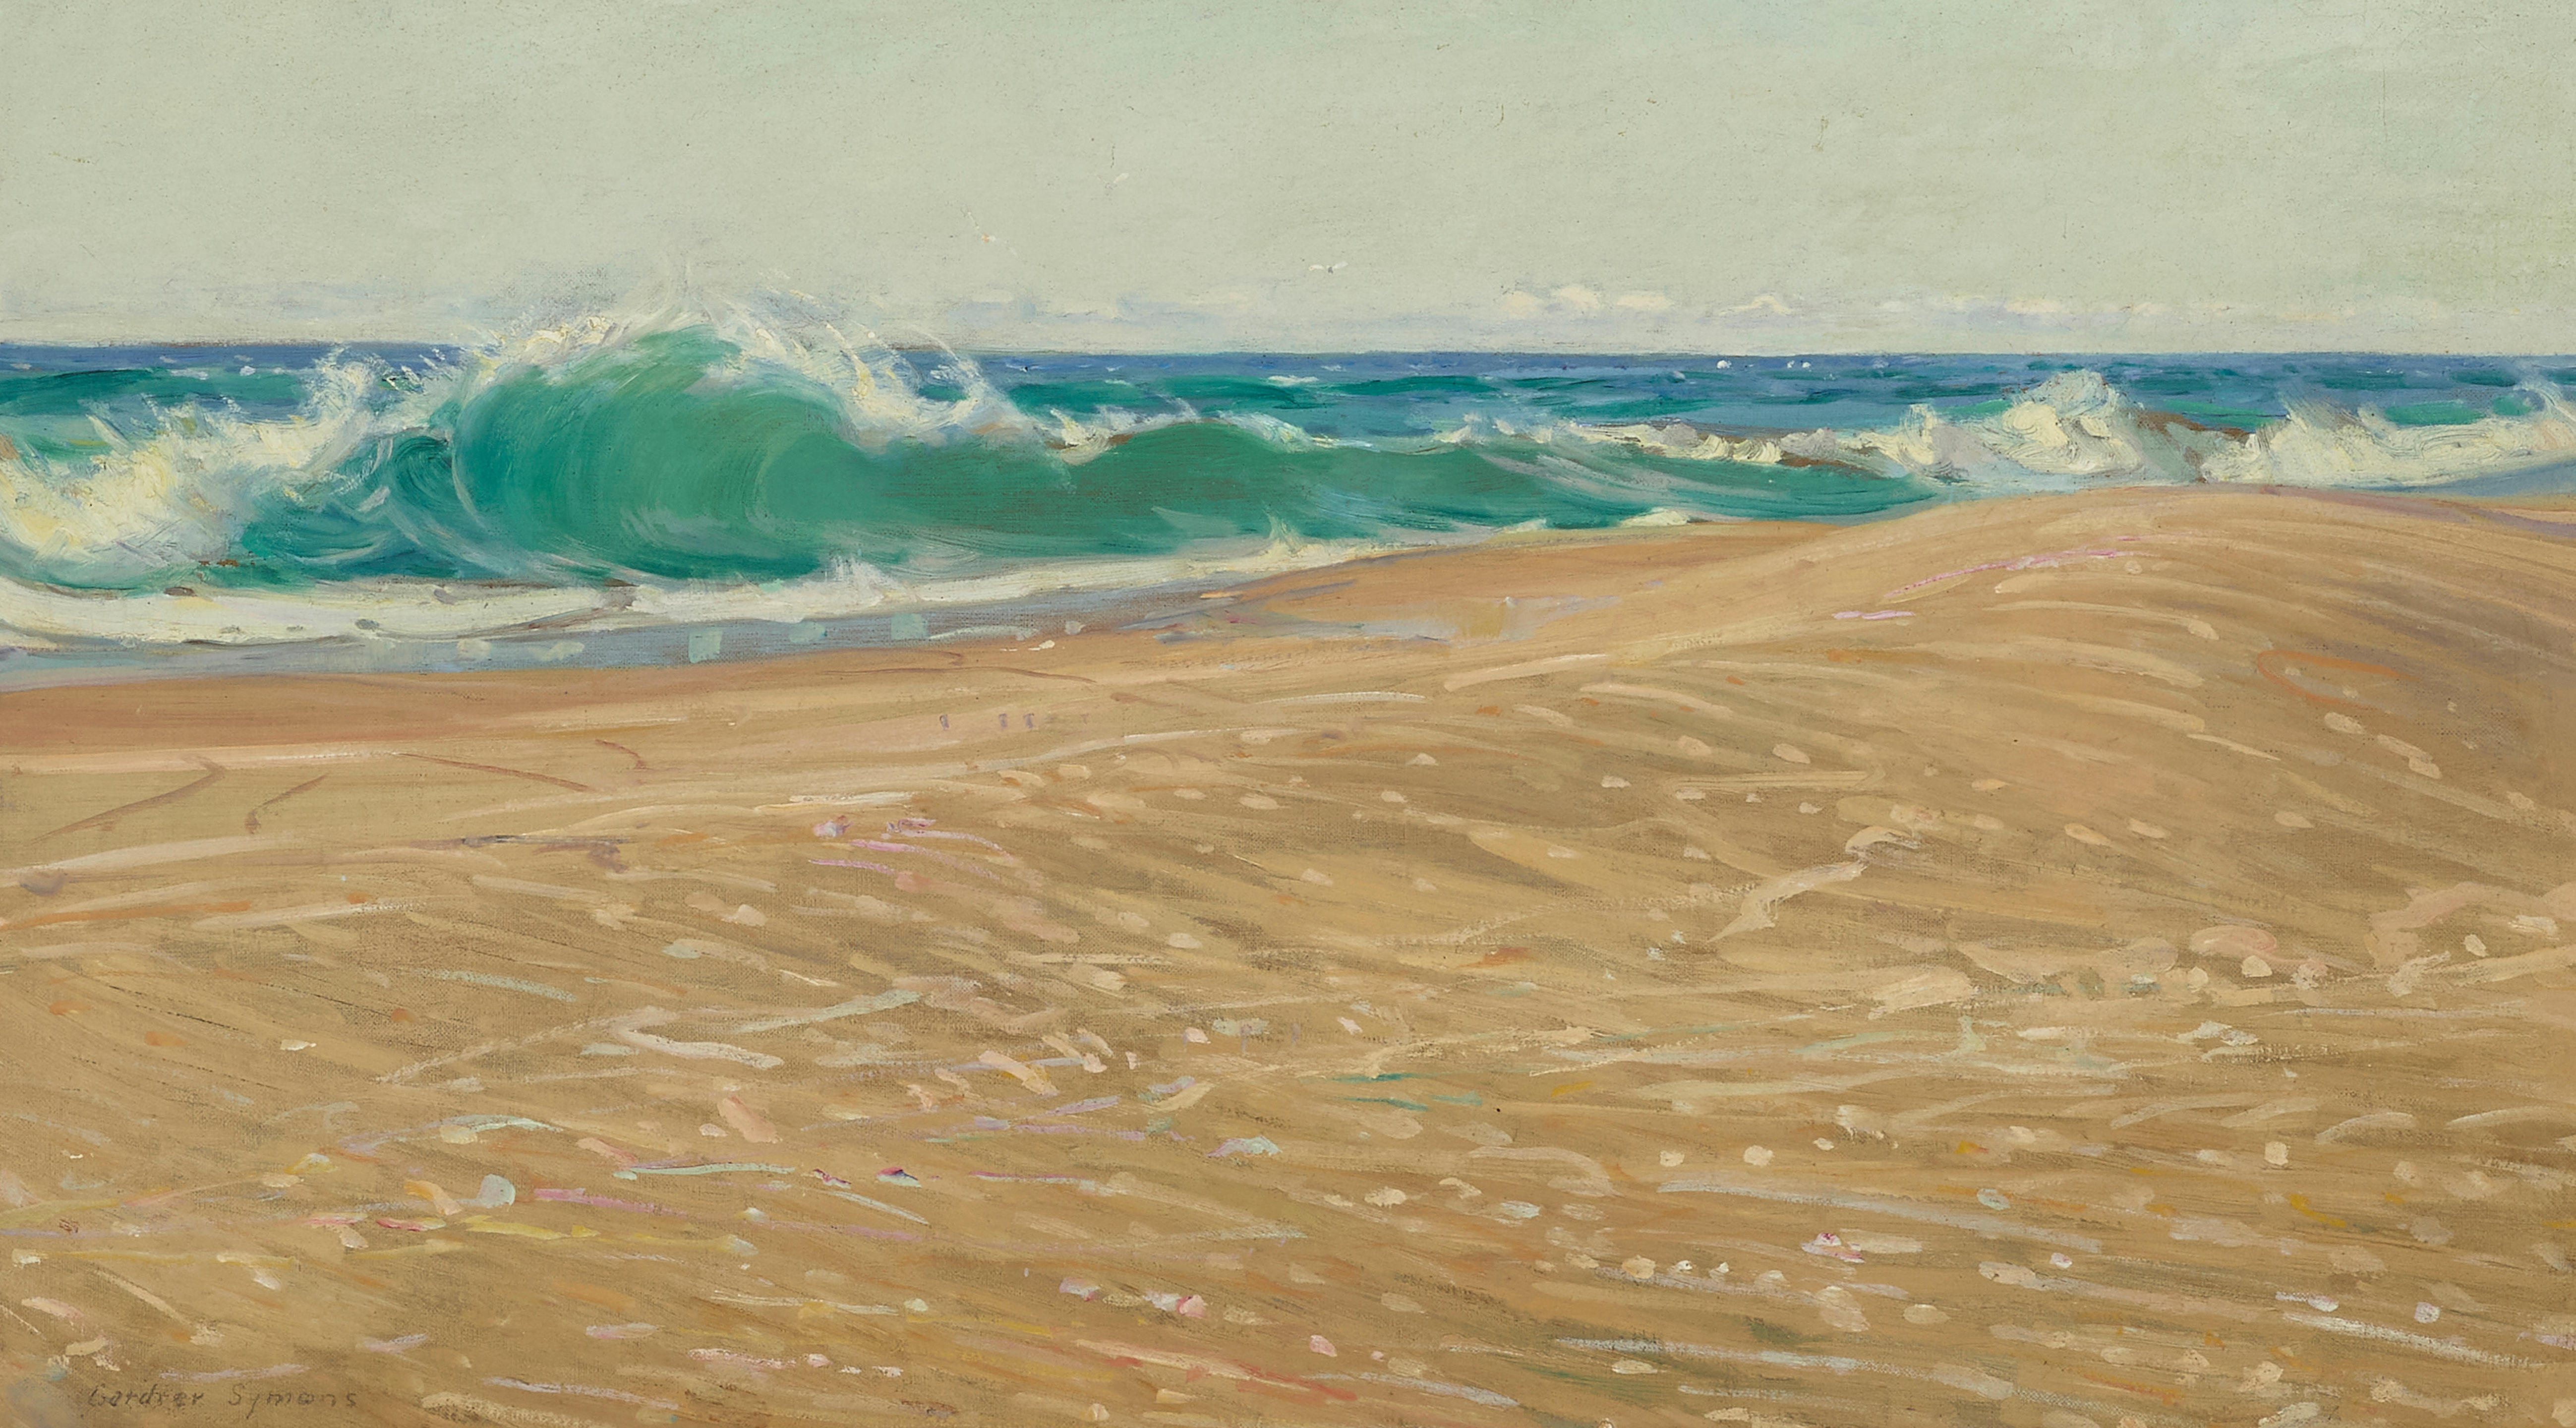 Coast to Coast | Live Online: American Art, including The Collection of Gail Feingarten Oppenheimer